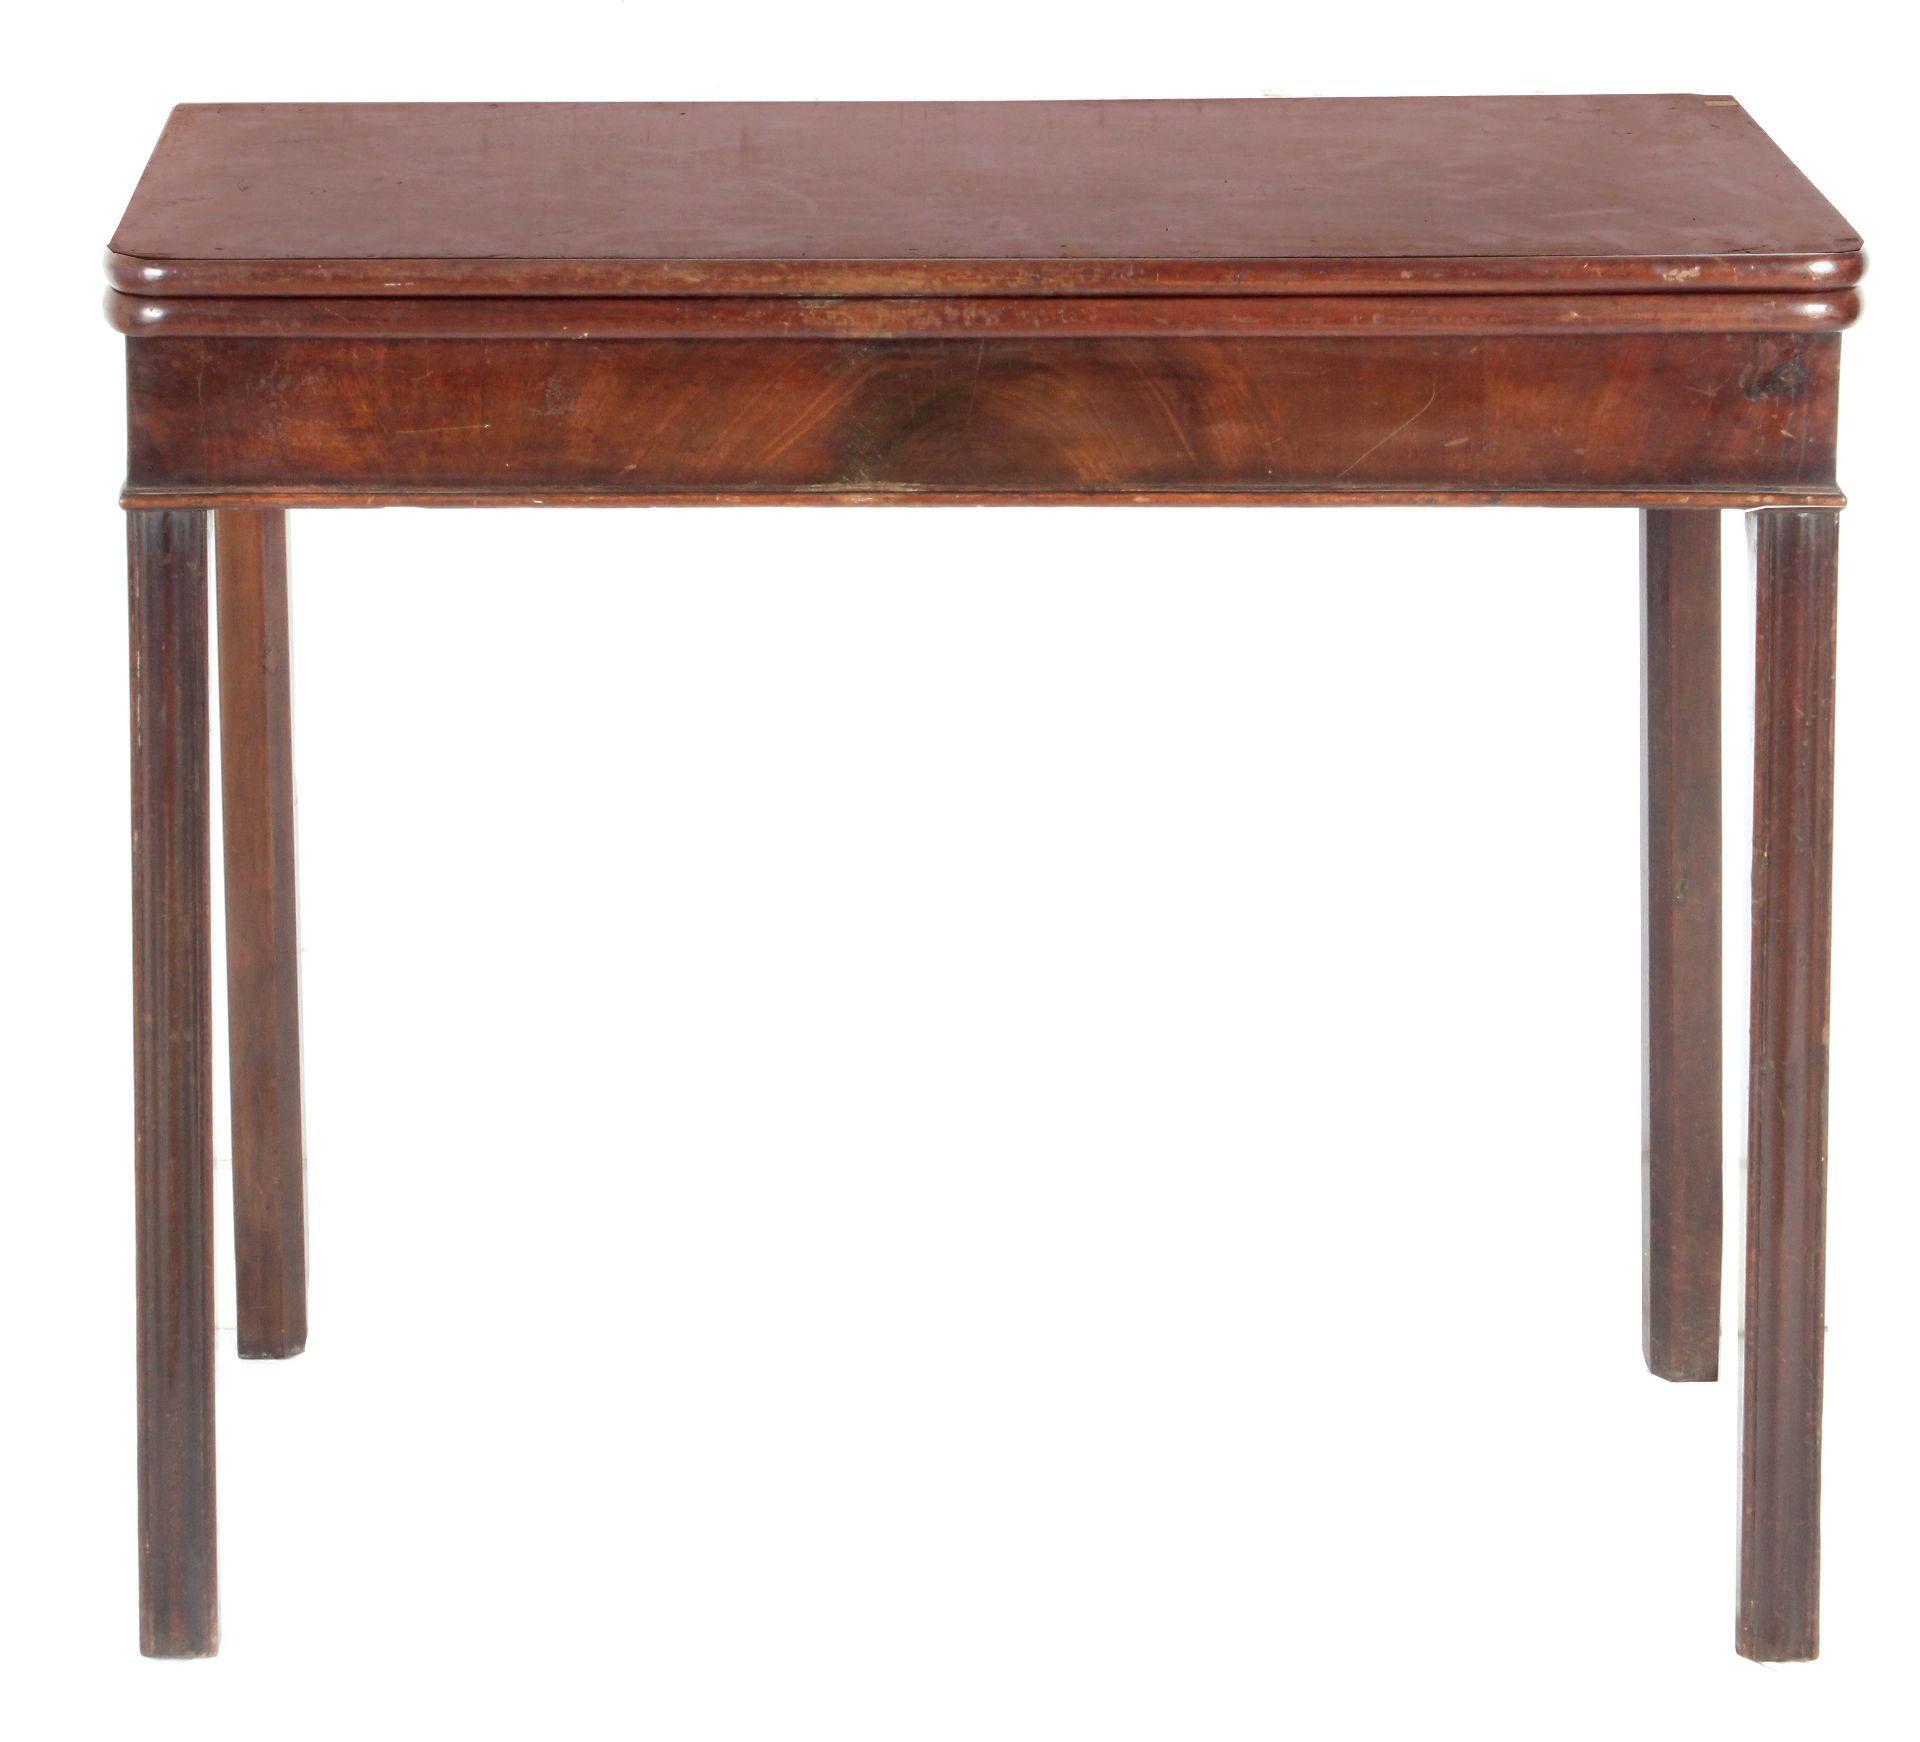 A 19th century French mahogany side table